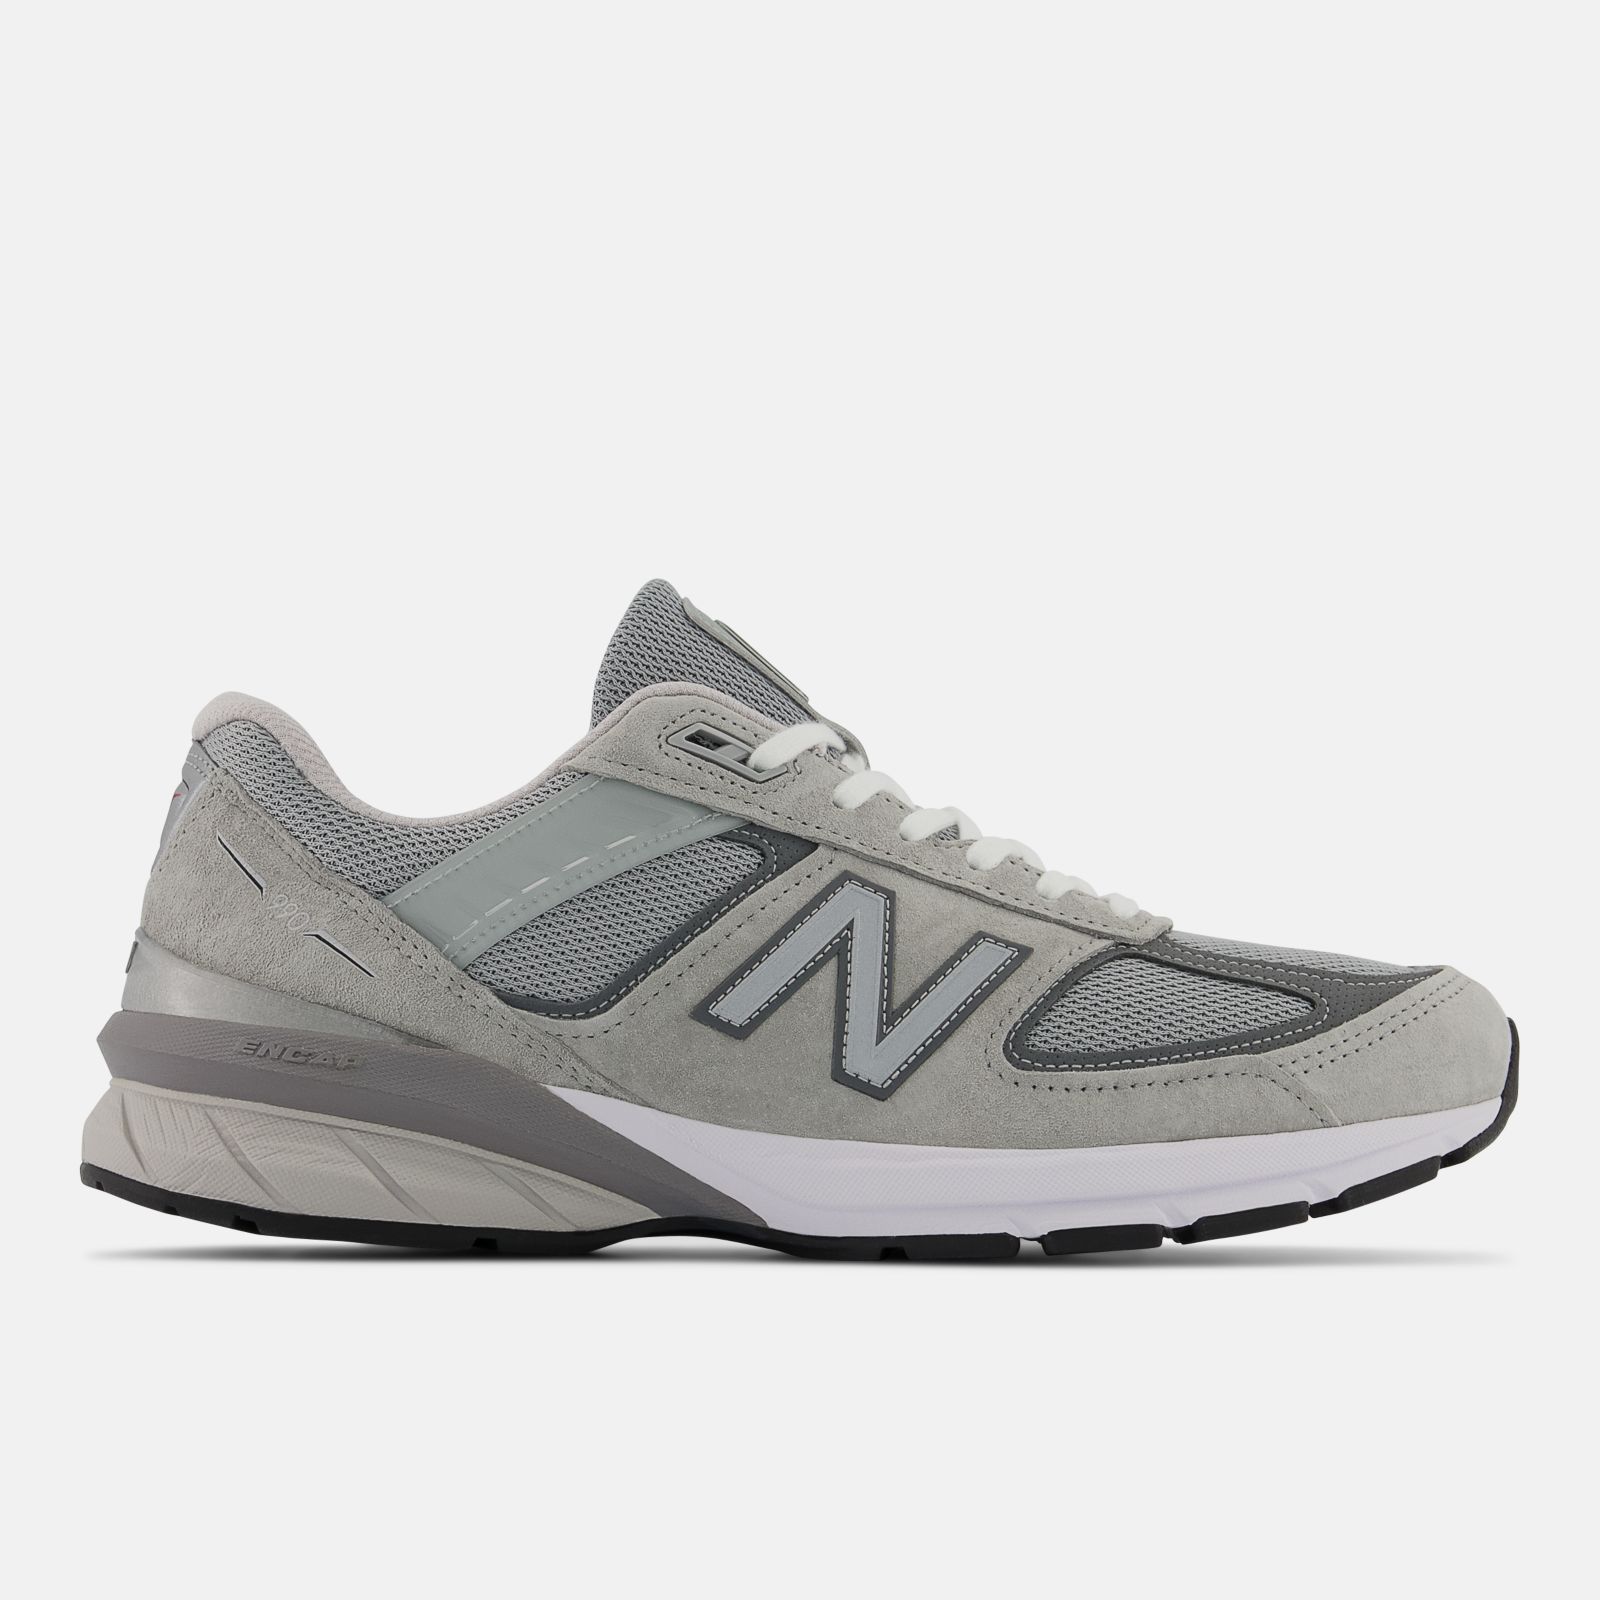 New Balance Women's Blue Made In US 990 v5 Sneakers